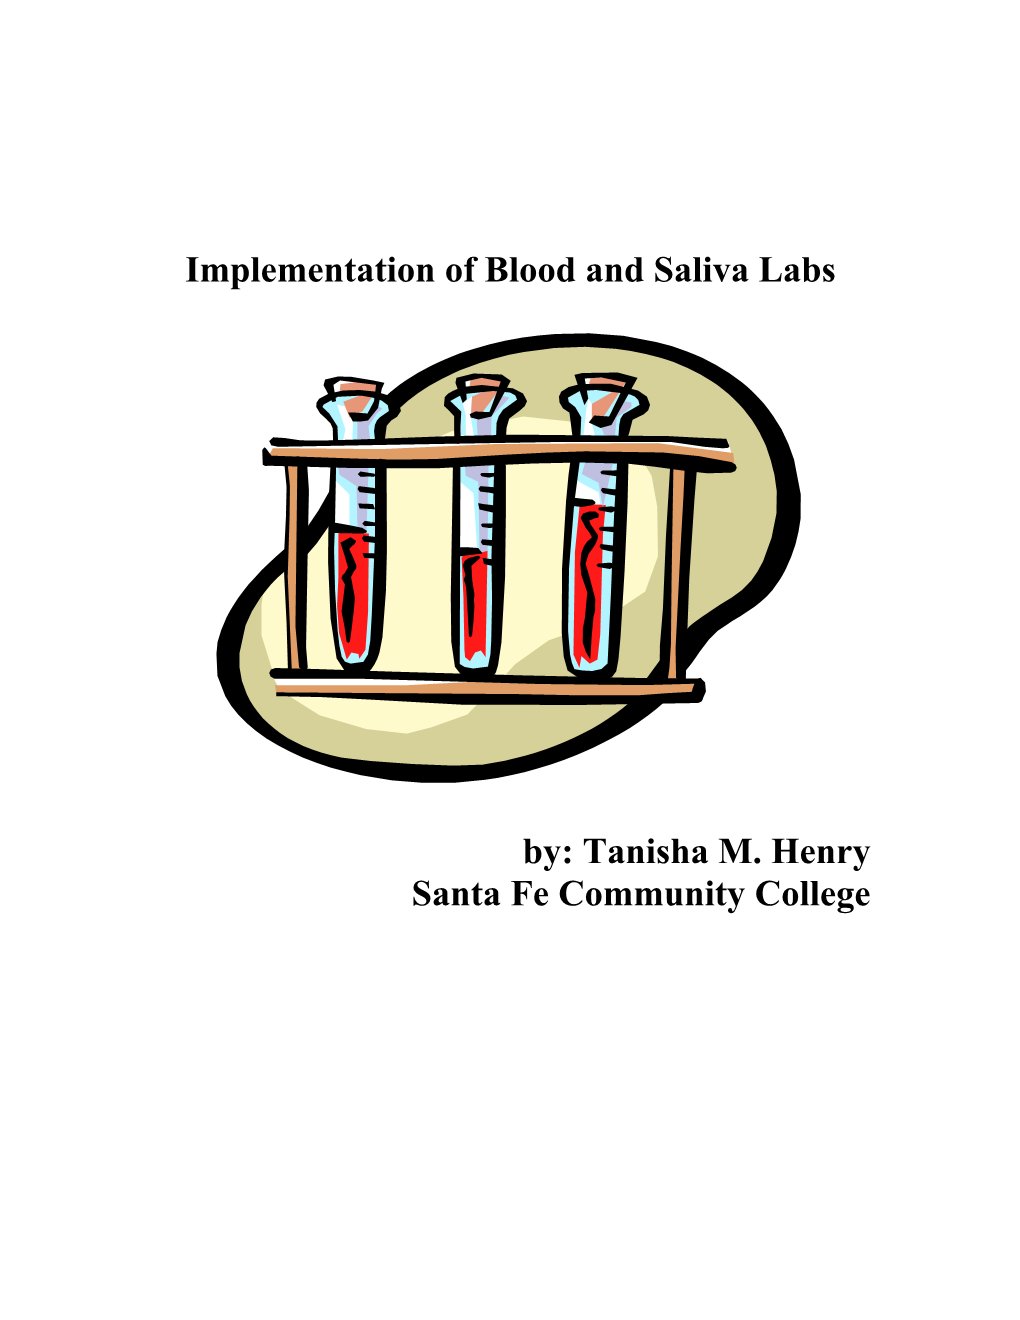 Implementation of Blood and Saliva Labs